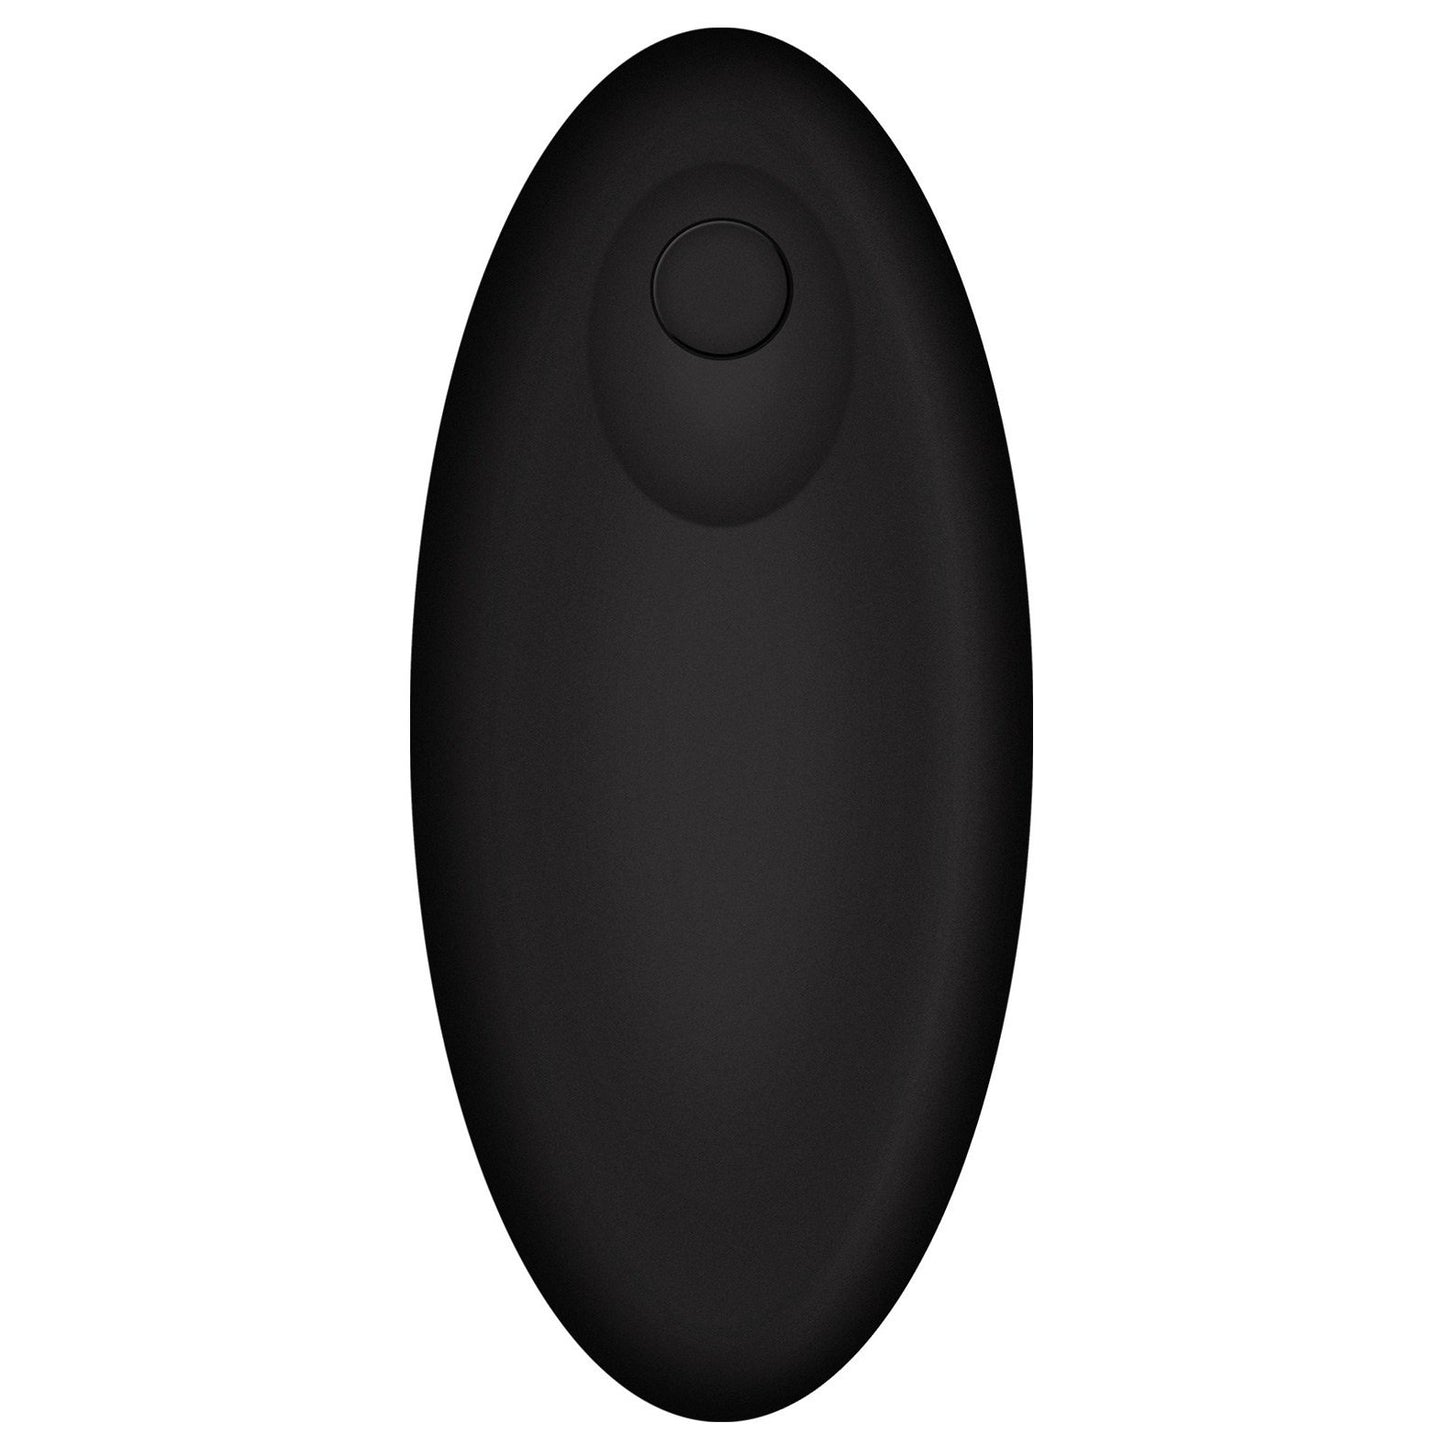 OptiMale Vibrating P Massager with Wireless Remote